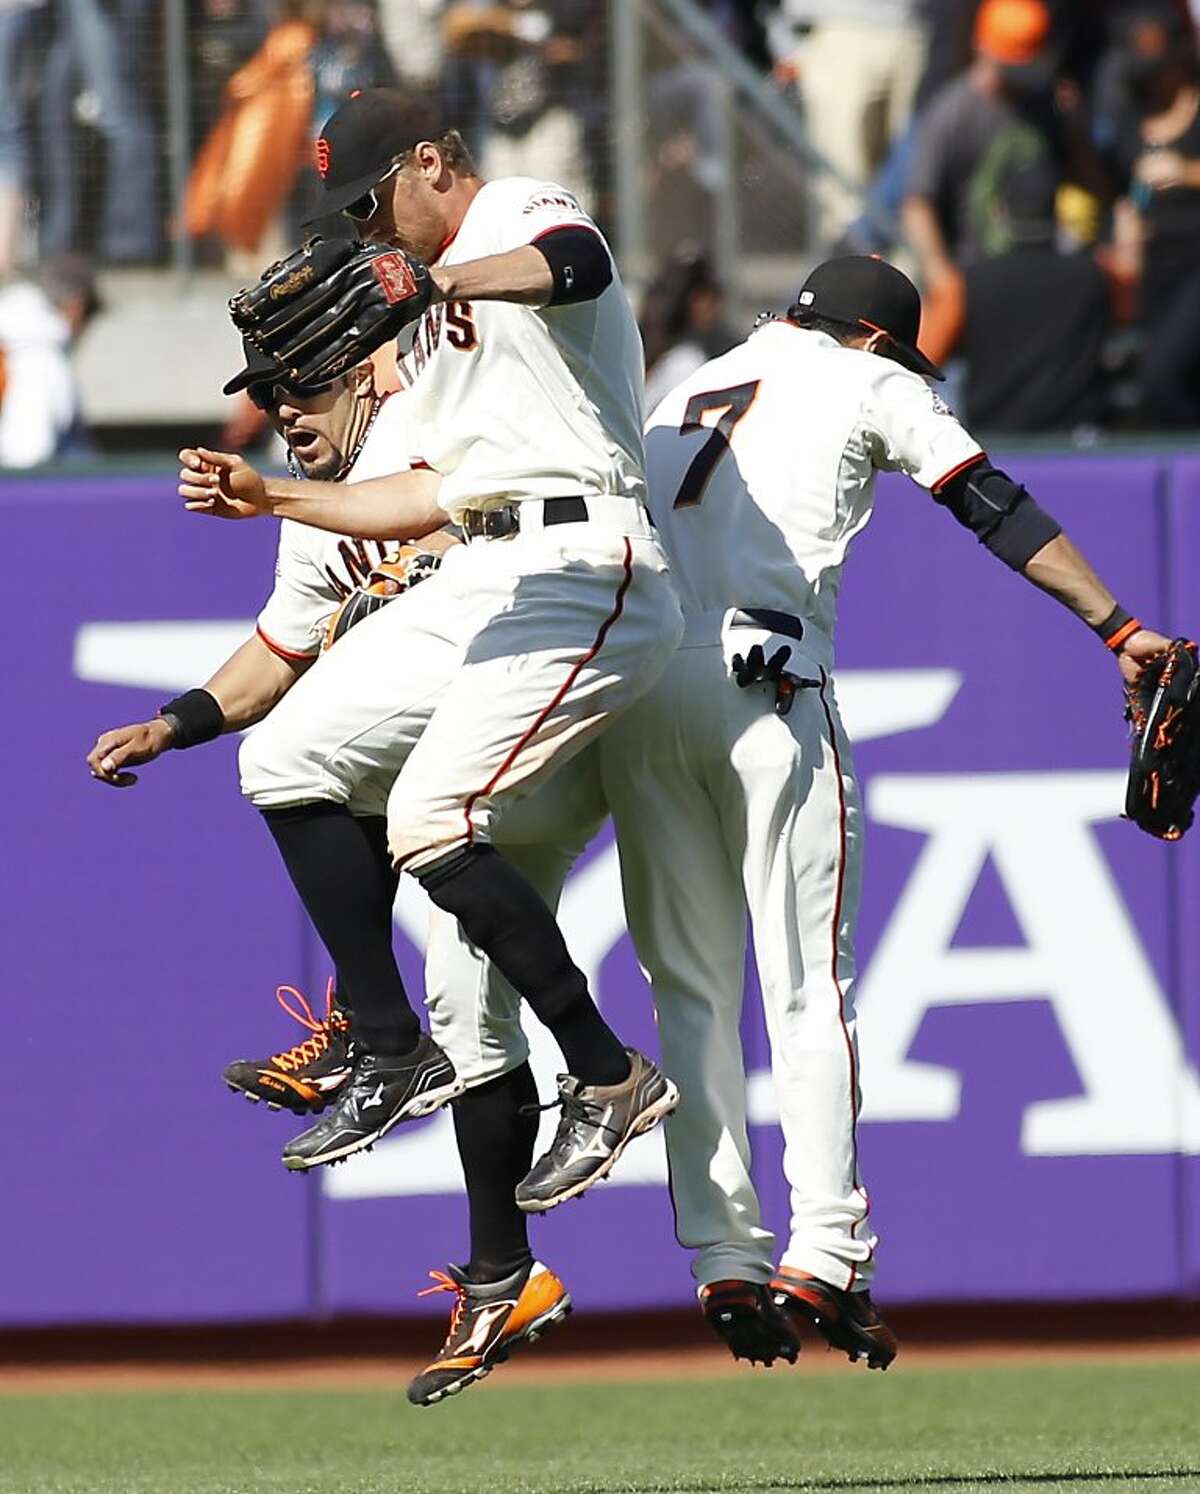 San Francisco Giants' Andres Torres, left, Hunter Pence, center, and Gregor Blanco celebrate after defeating the Colorado Rockies 7-3 in a baseball game on Sunday, May 26, 2013, in San Francisco. (AP Photo/George Nikitin)